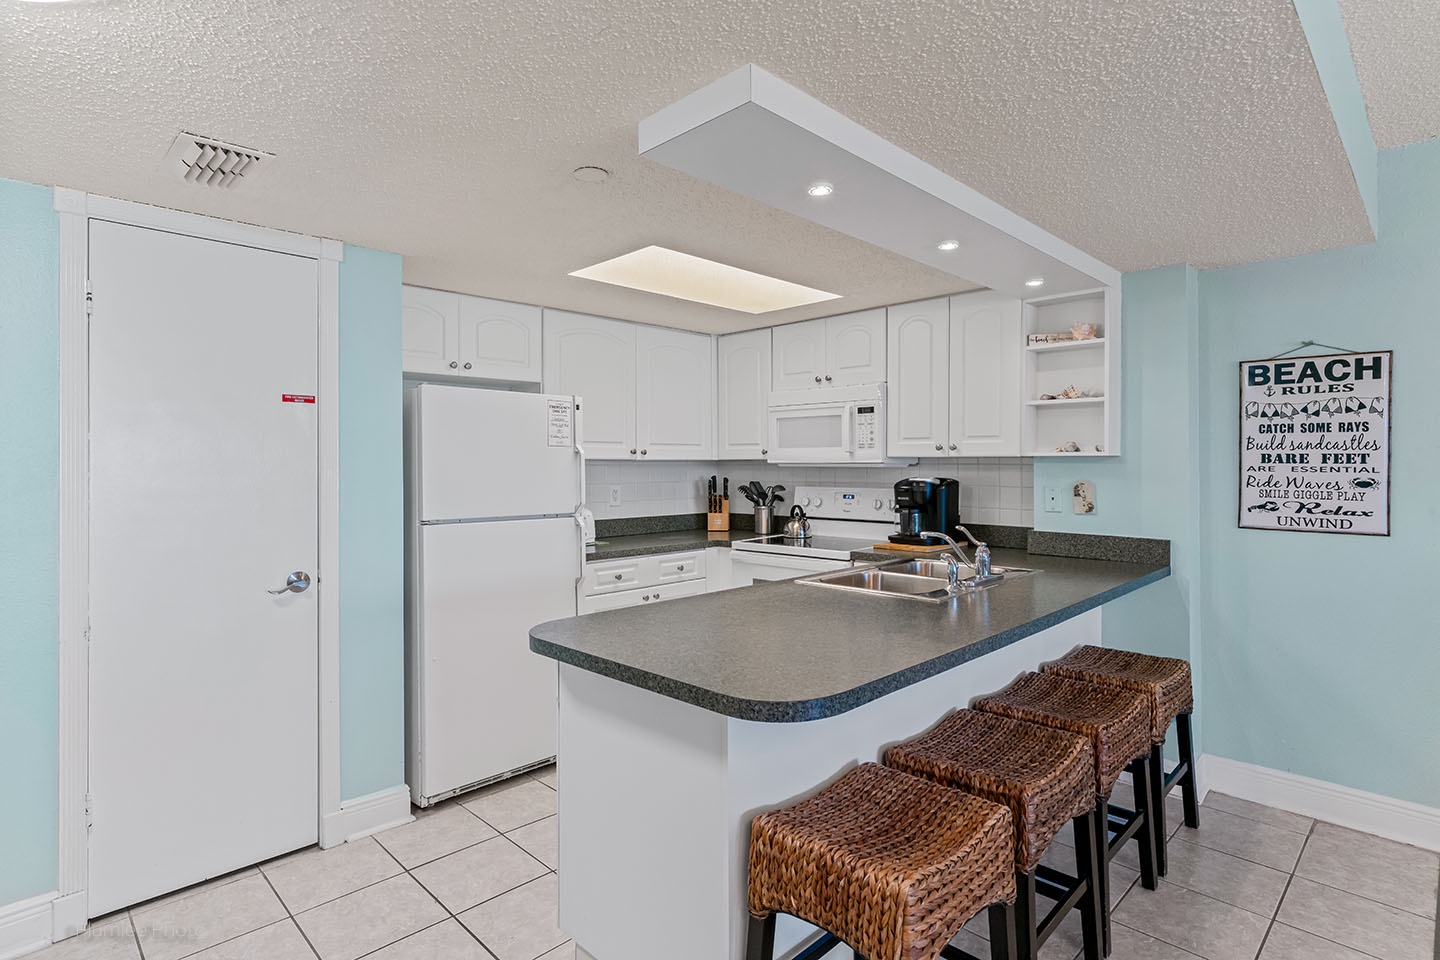 Fully appointed kitchen with breakfast bar